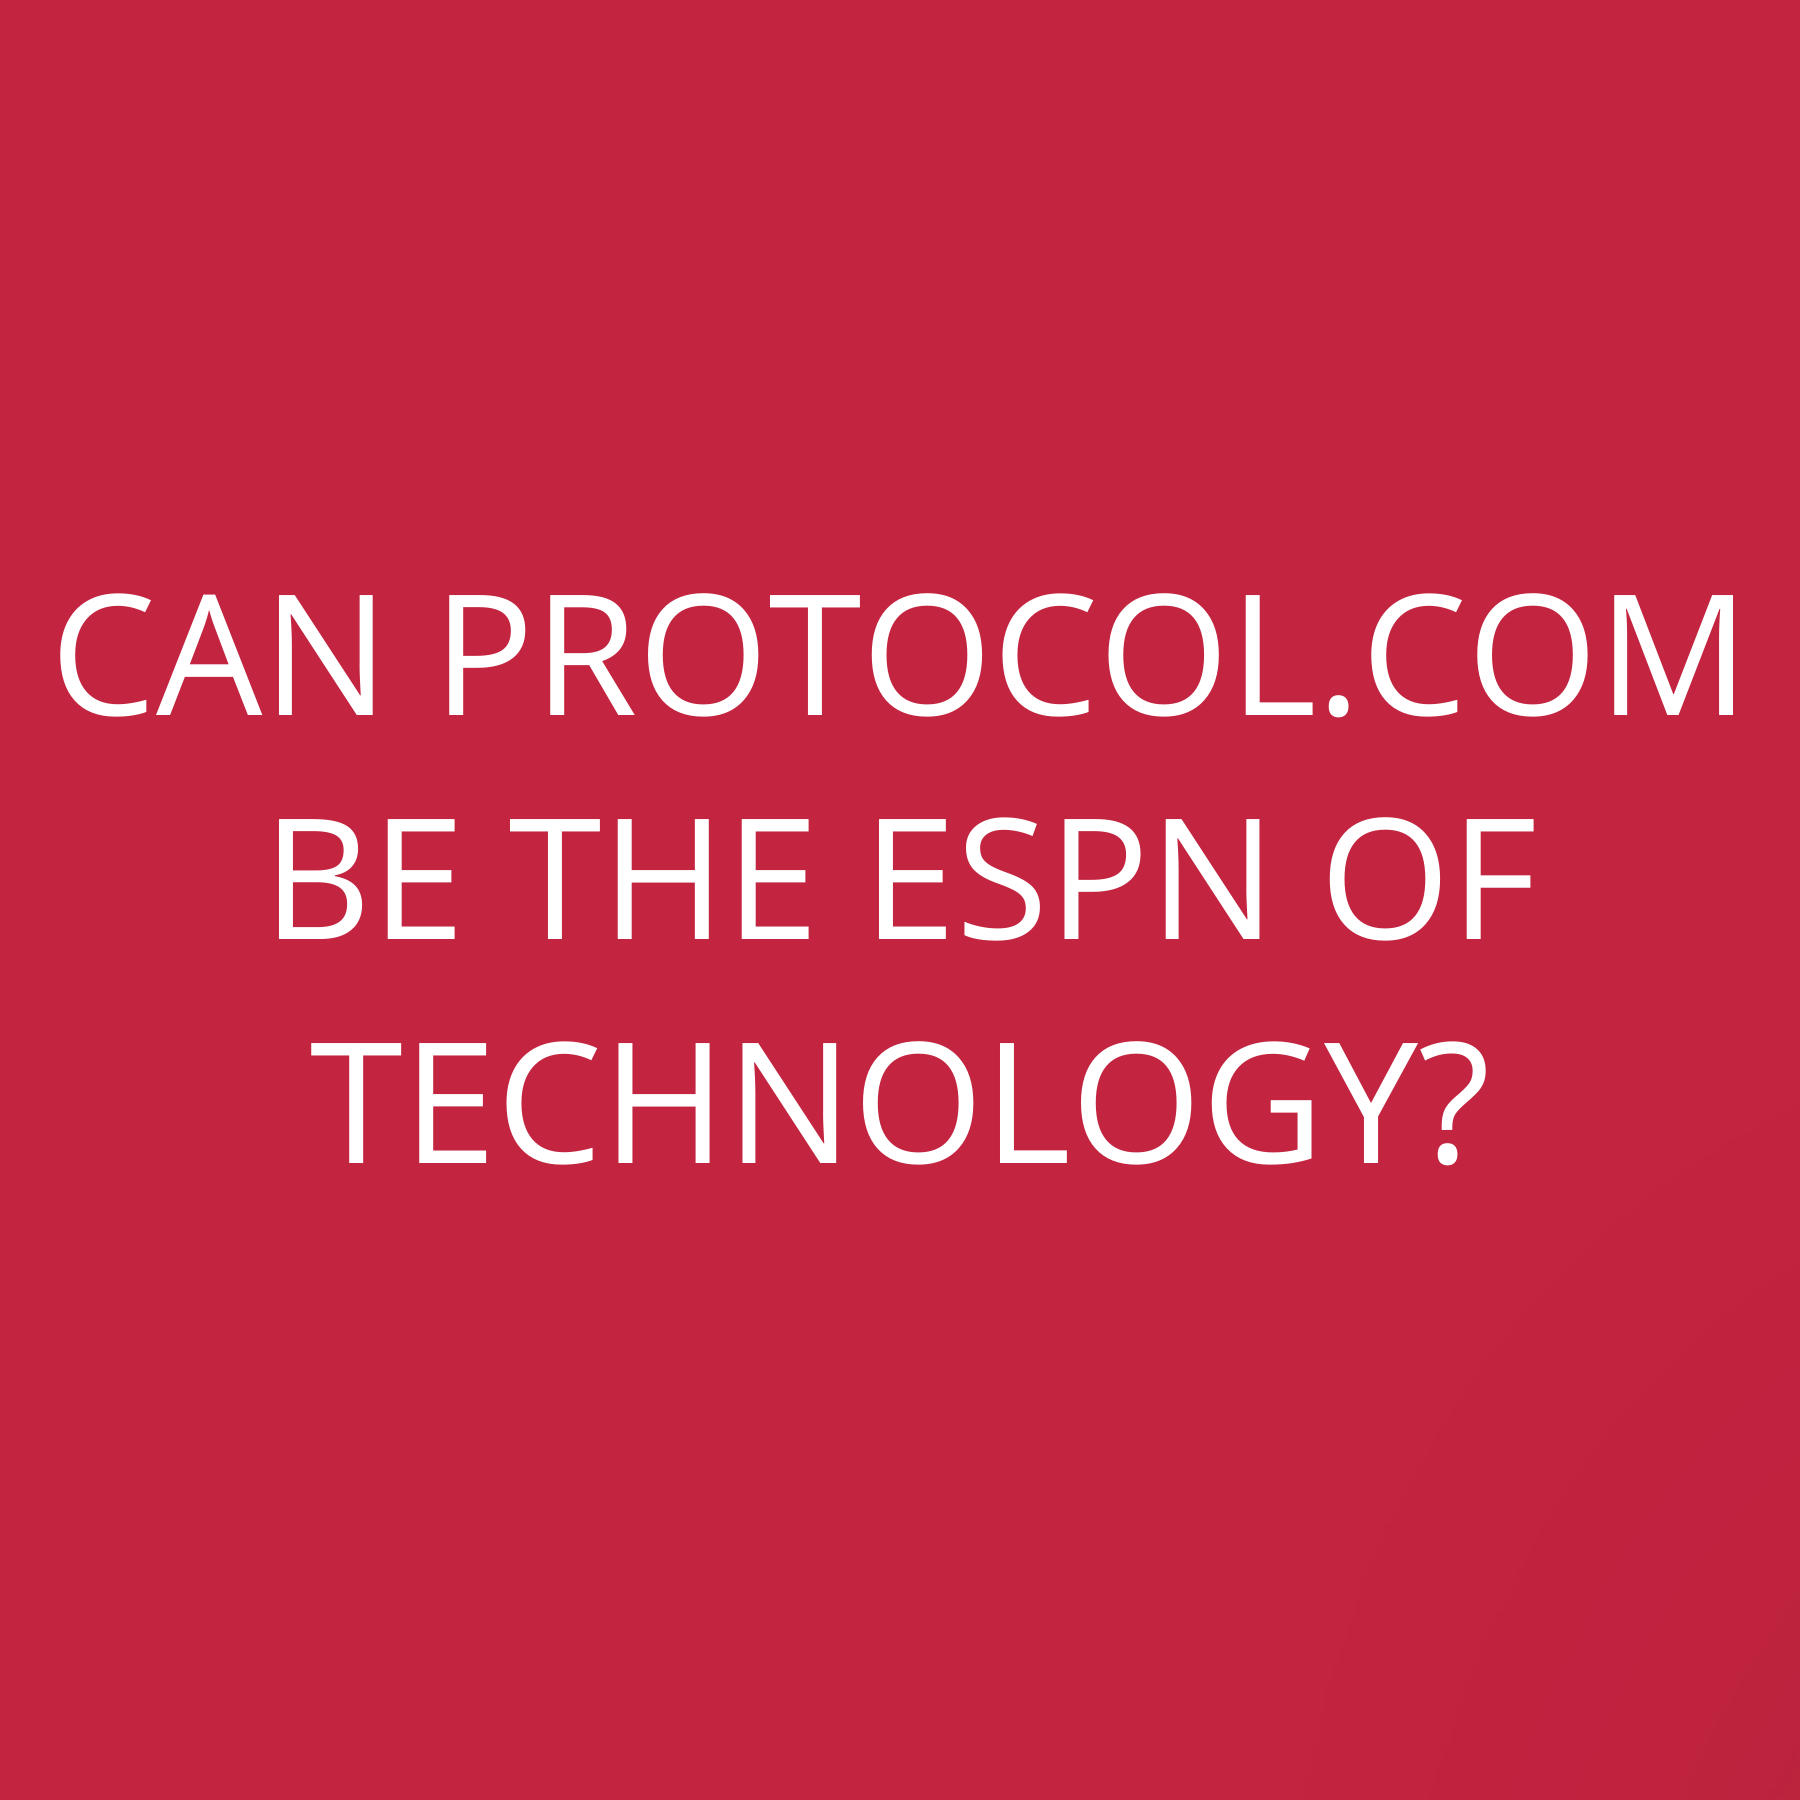 Can Protocol.com be the ESPN of technology?